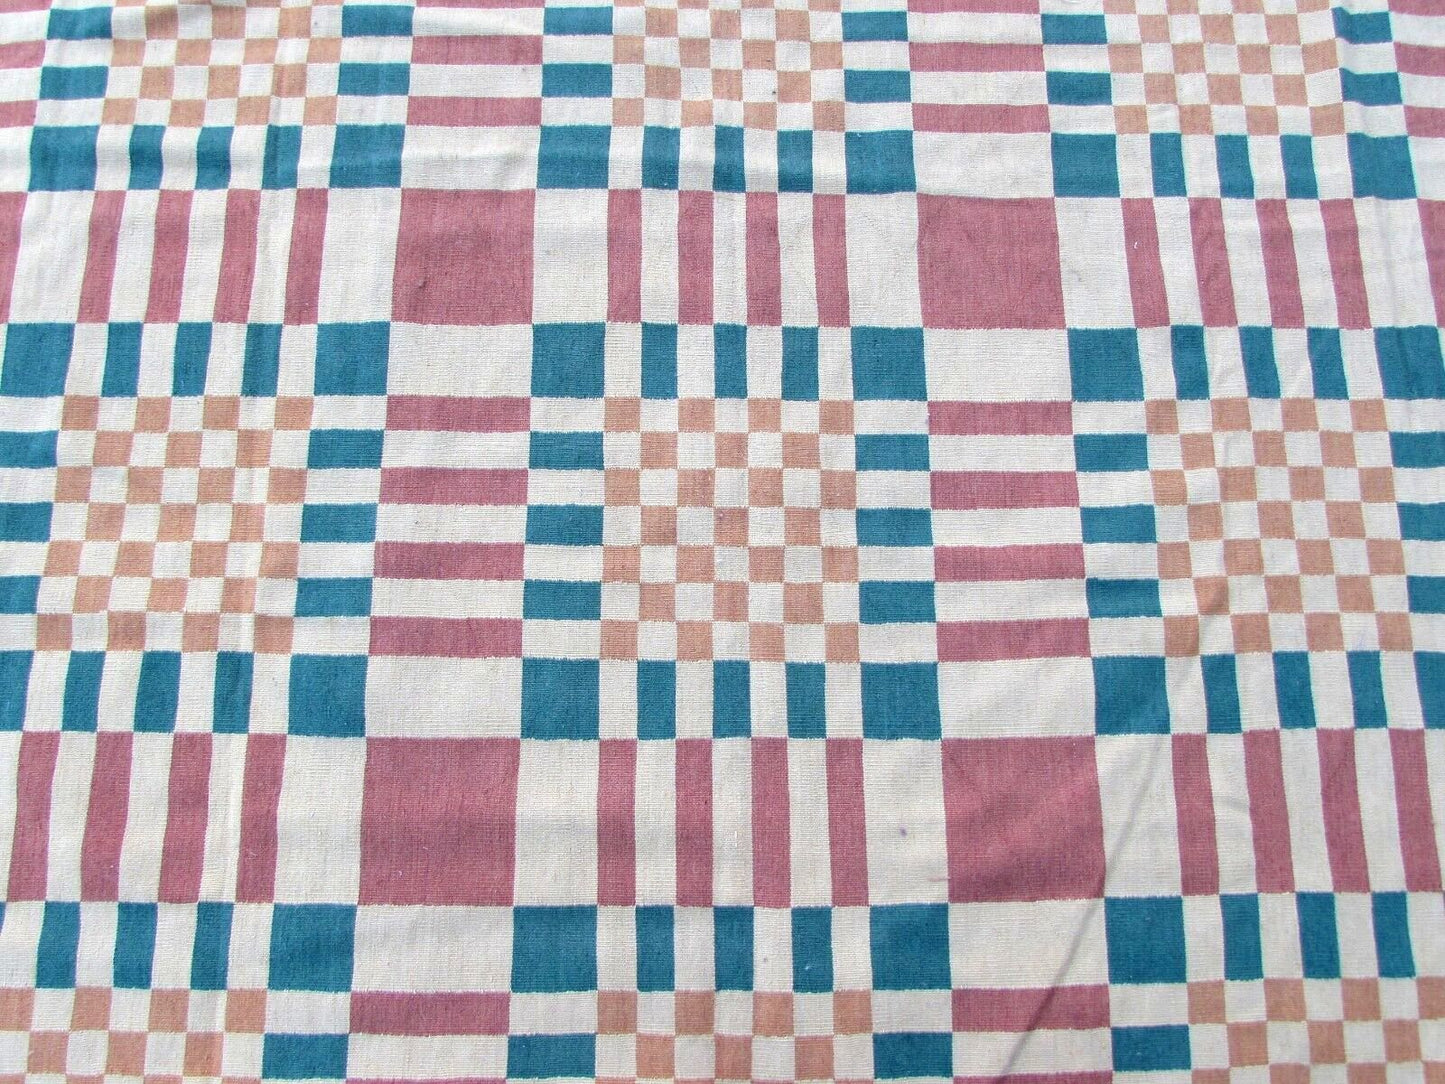 Exquisite Detailing on Vintage French Aubusson Rug - Geometric Design with Colorful Squares - Handmade Wool Rug from France - Circa 1970s - Beige, Turquoise, and Rose Colors